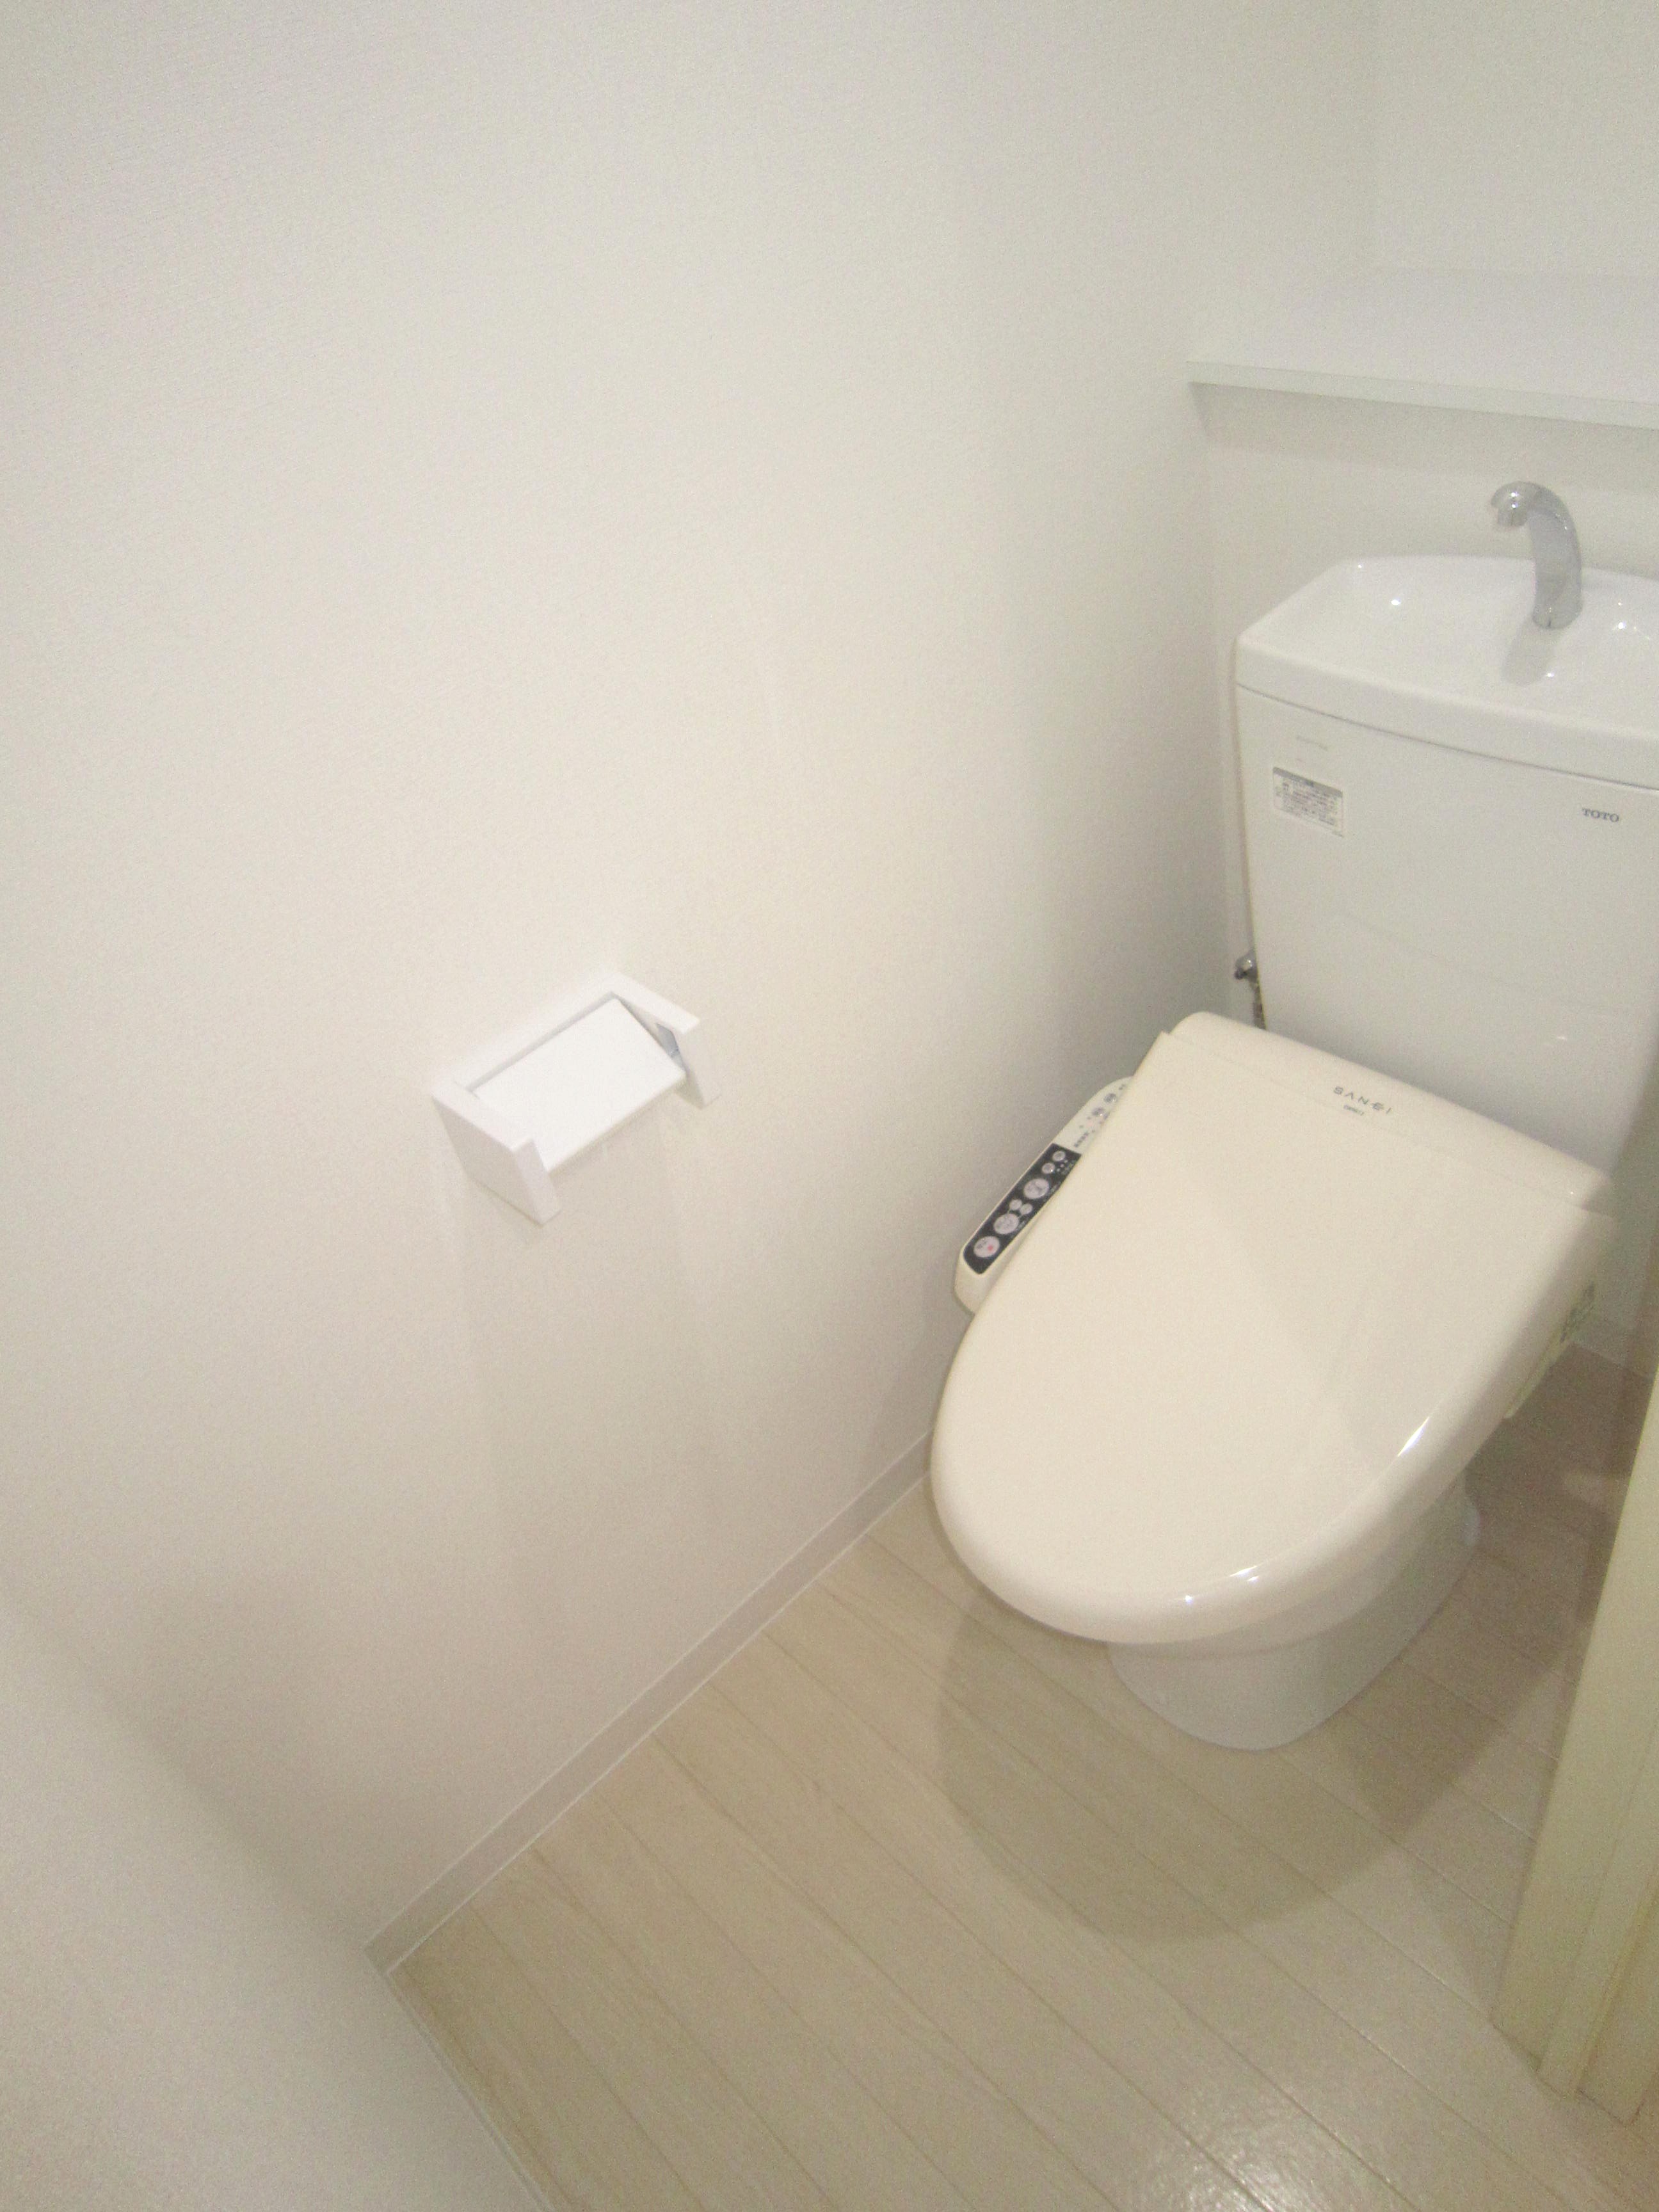 Toilet. It comes with a bidet. 